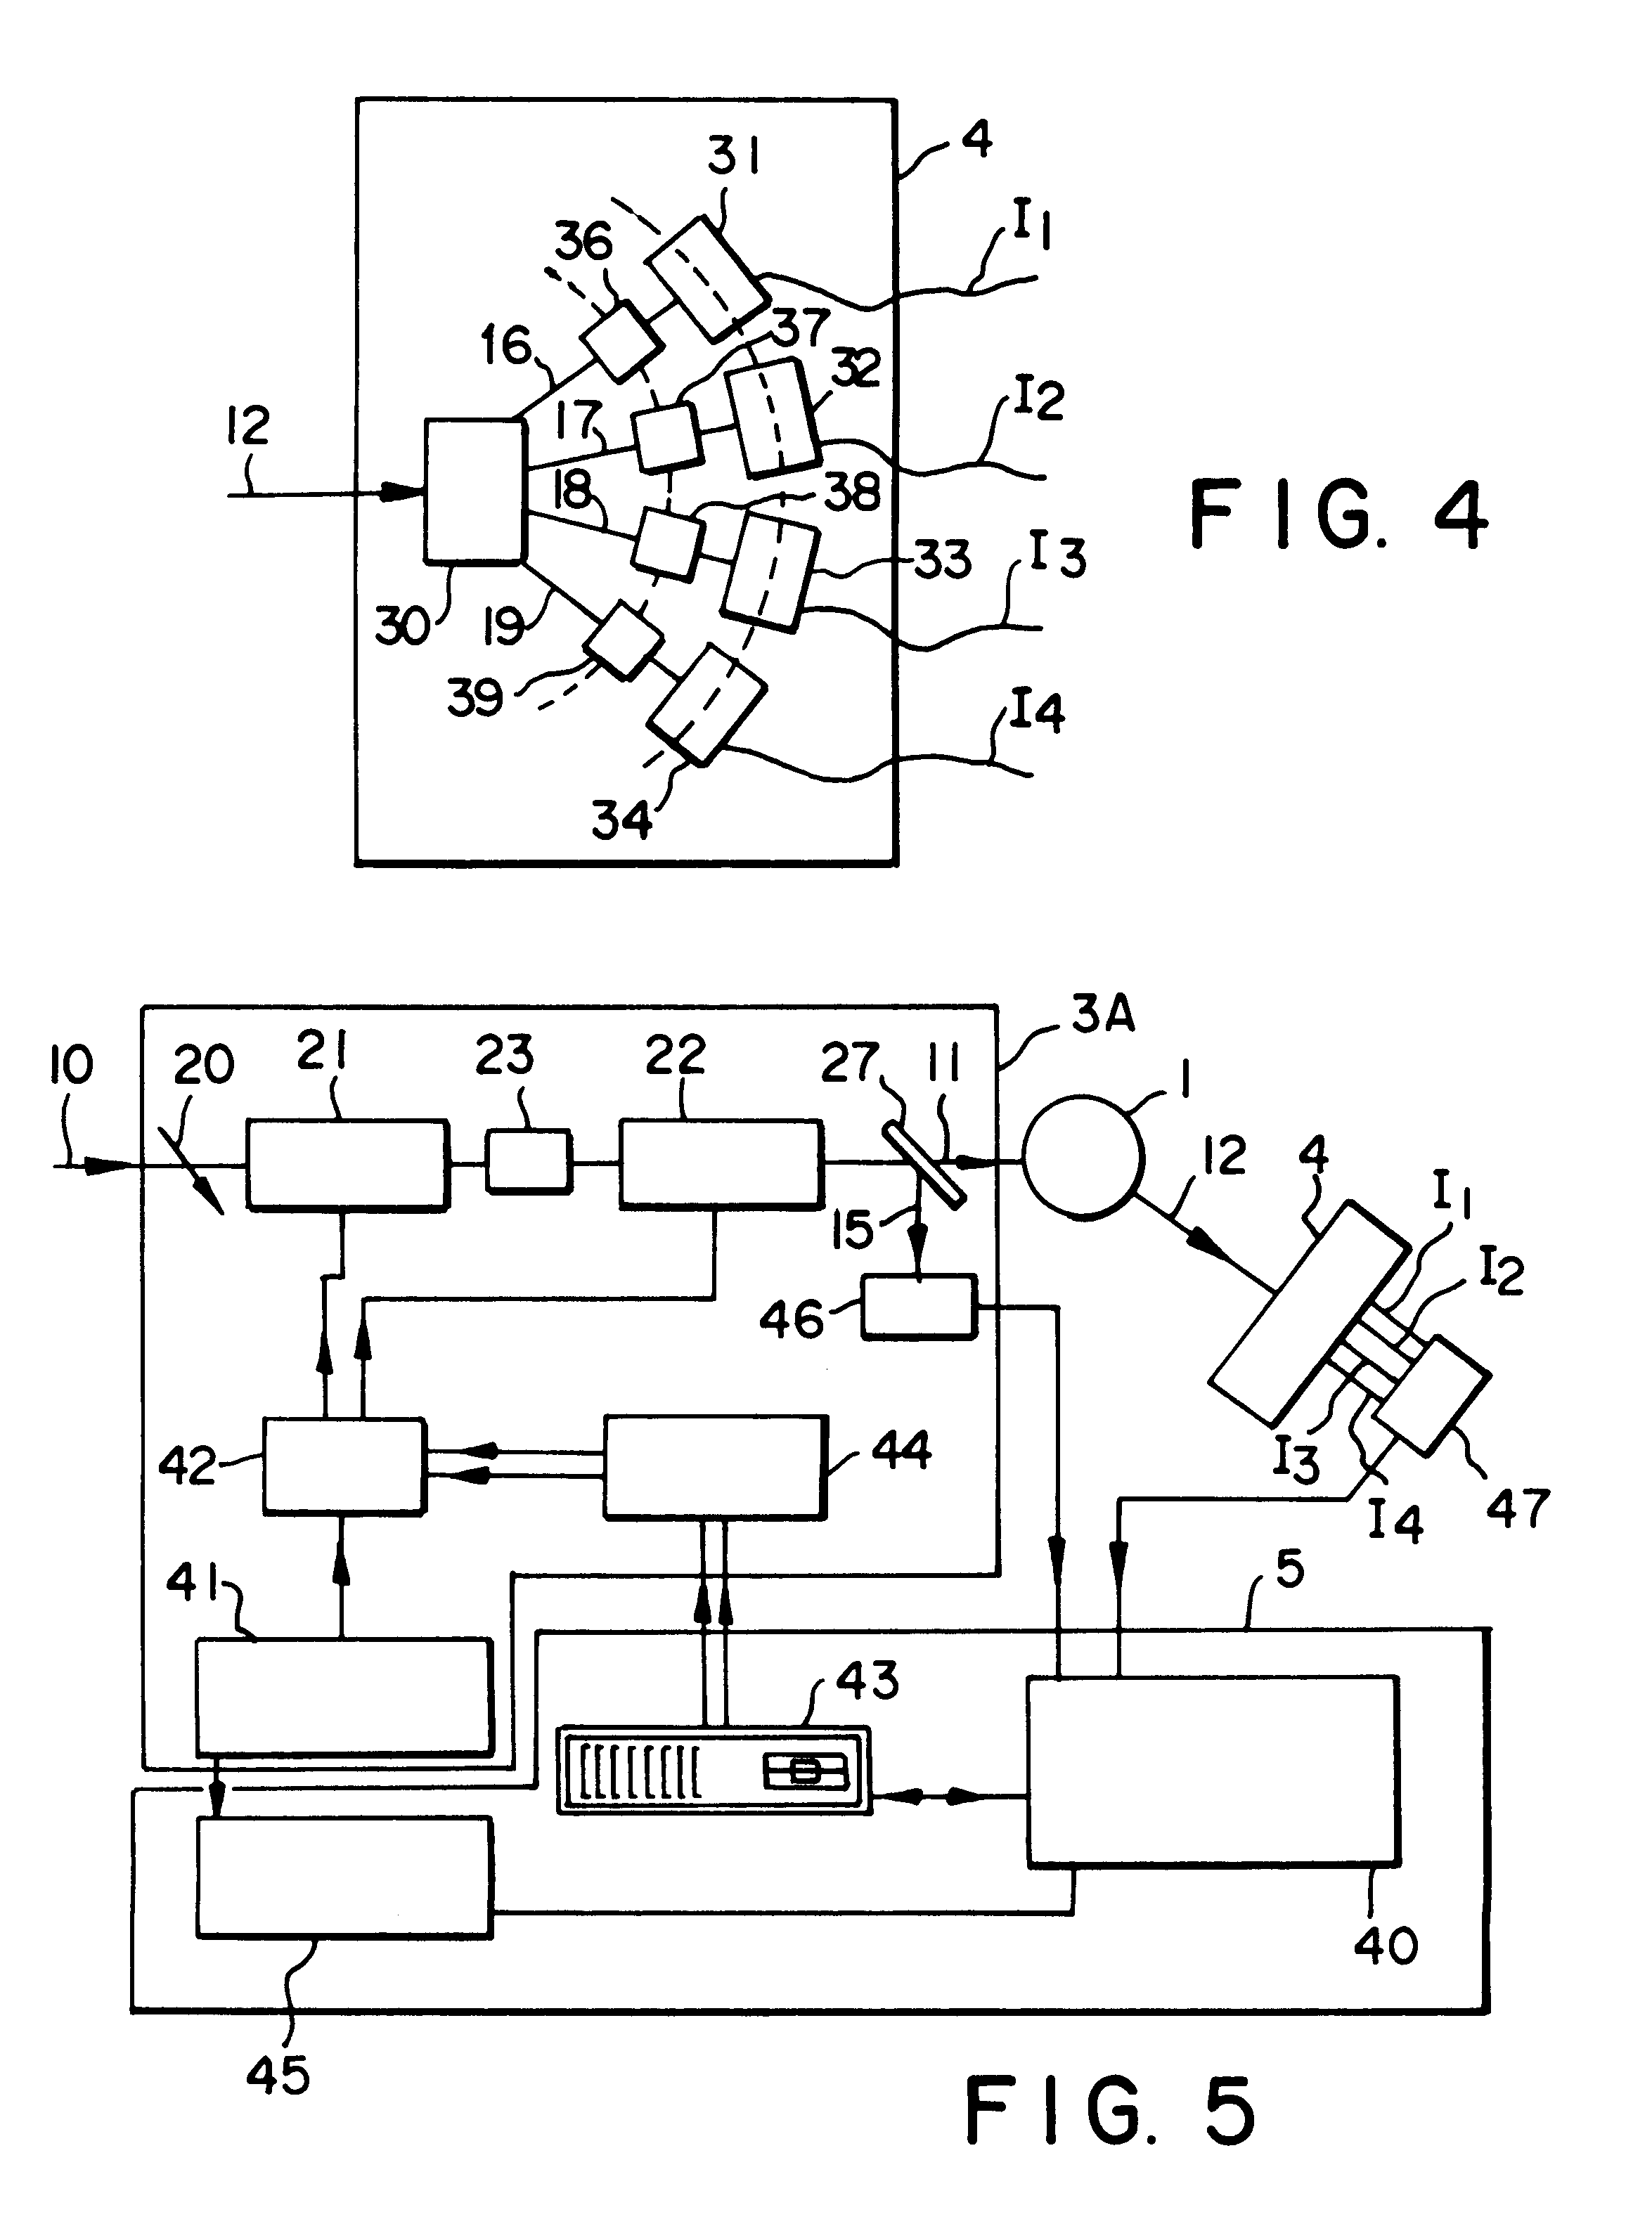 Optical component for polarization modulation, a mueller polarimeter and ellipsometer containing such an optical component, a process for the calibration of this ellipsometer, and an ellipsometric measurement process